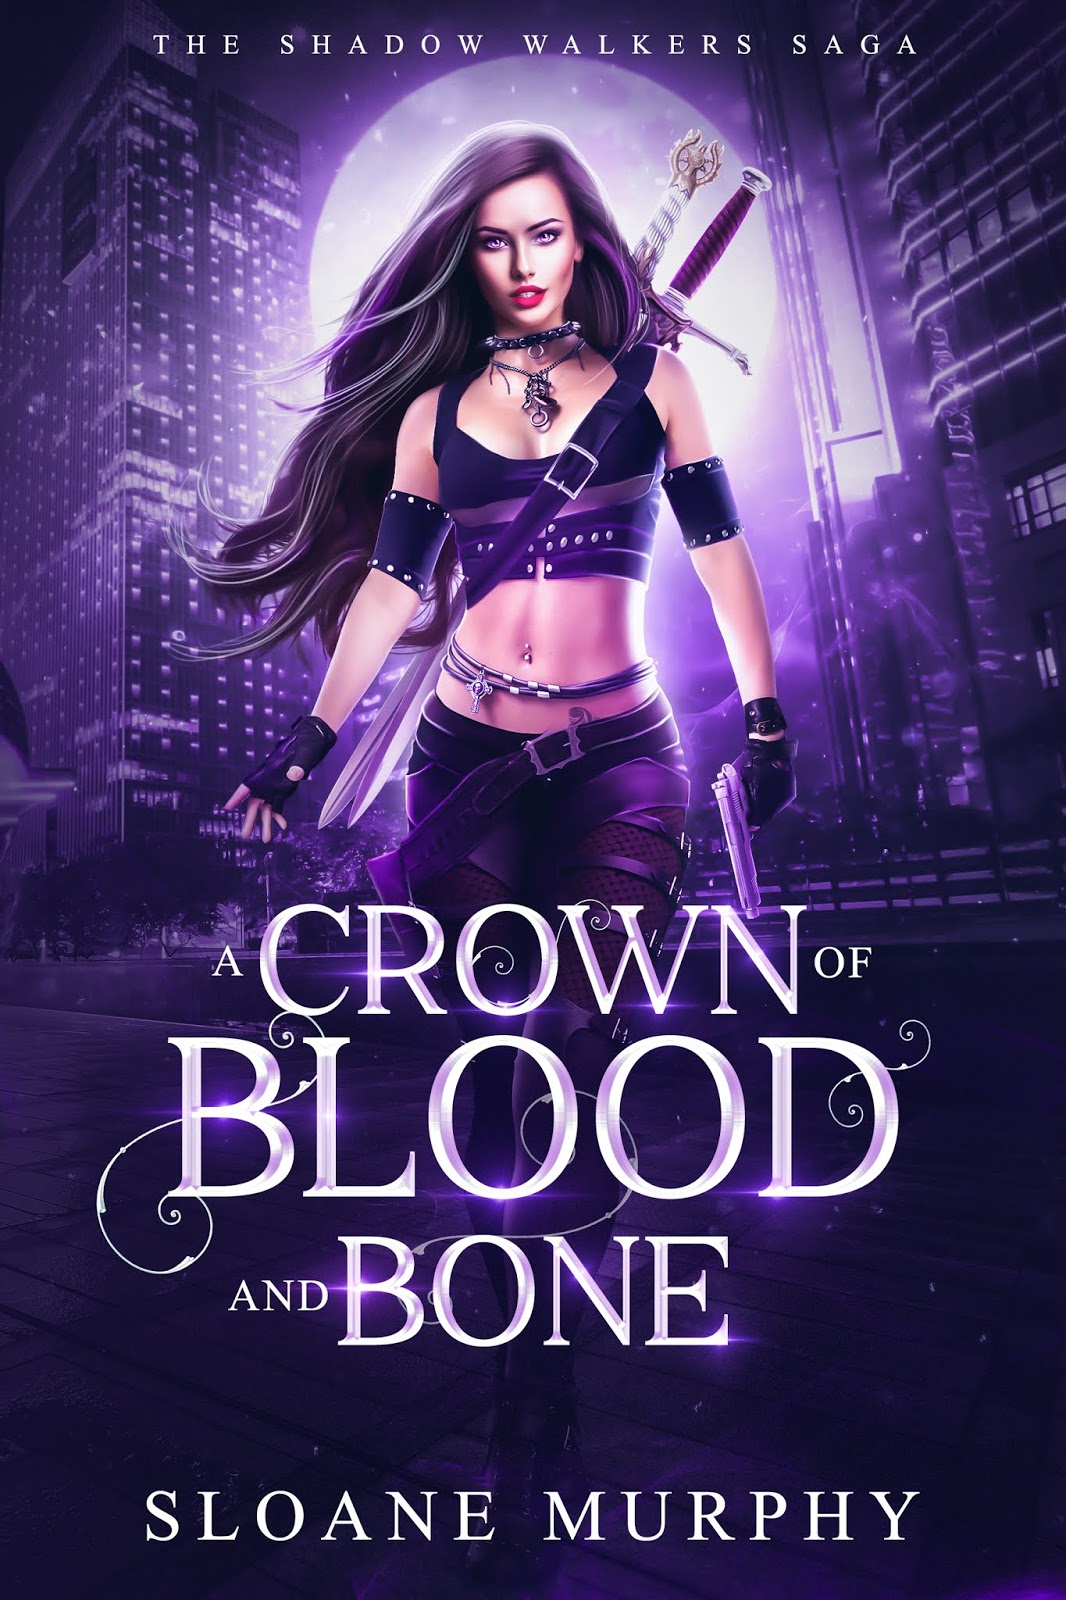 Karlee Kay: A Crown of Blood and Bone by Sloane Murphy - Cover Reveal